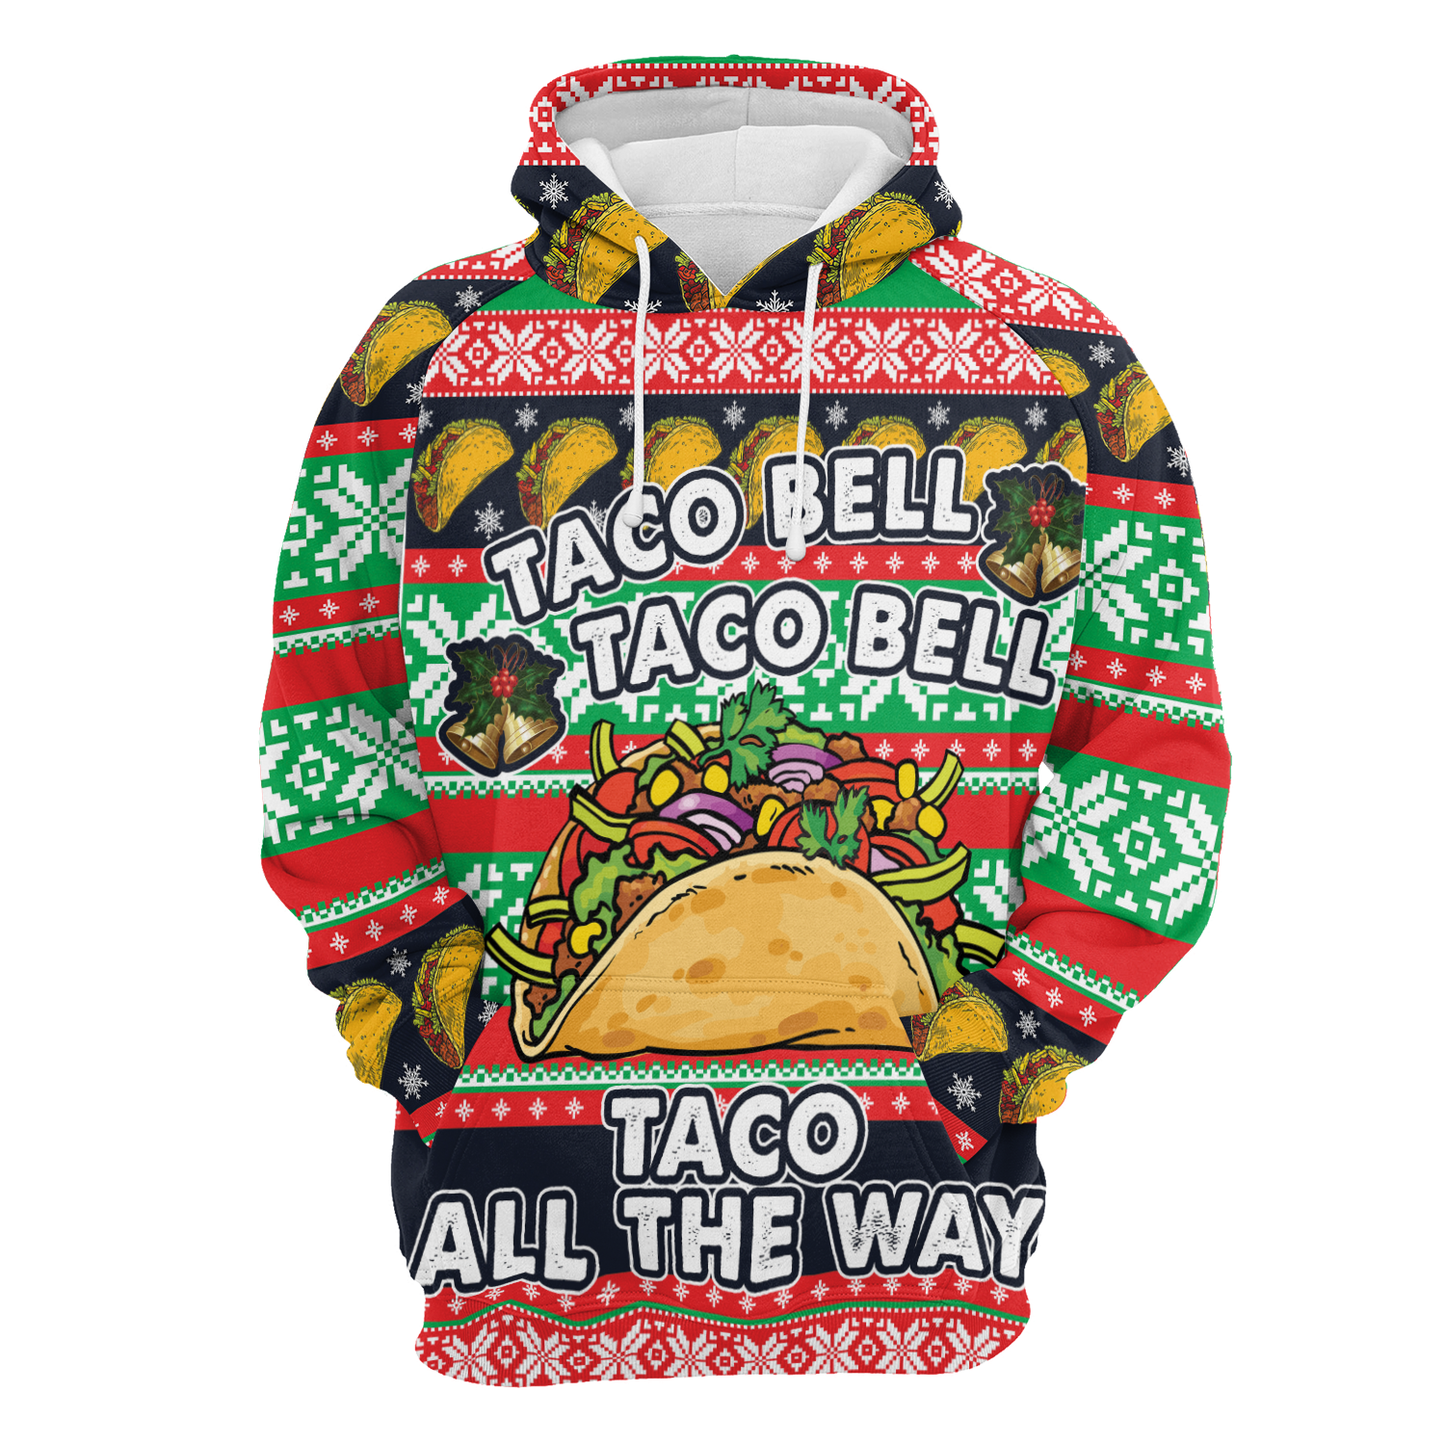 Tacos Taco Bell All Over Print Unisex Hoodie